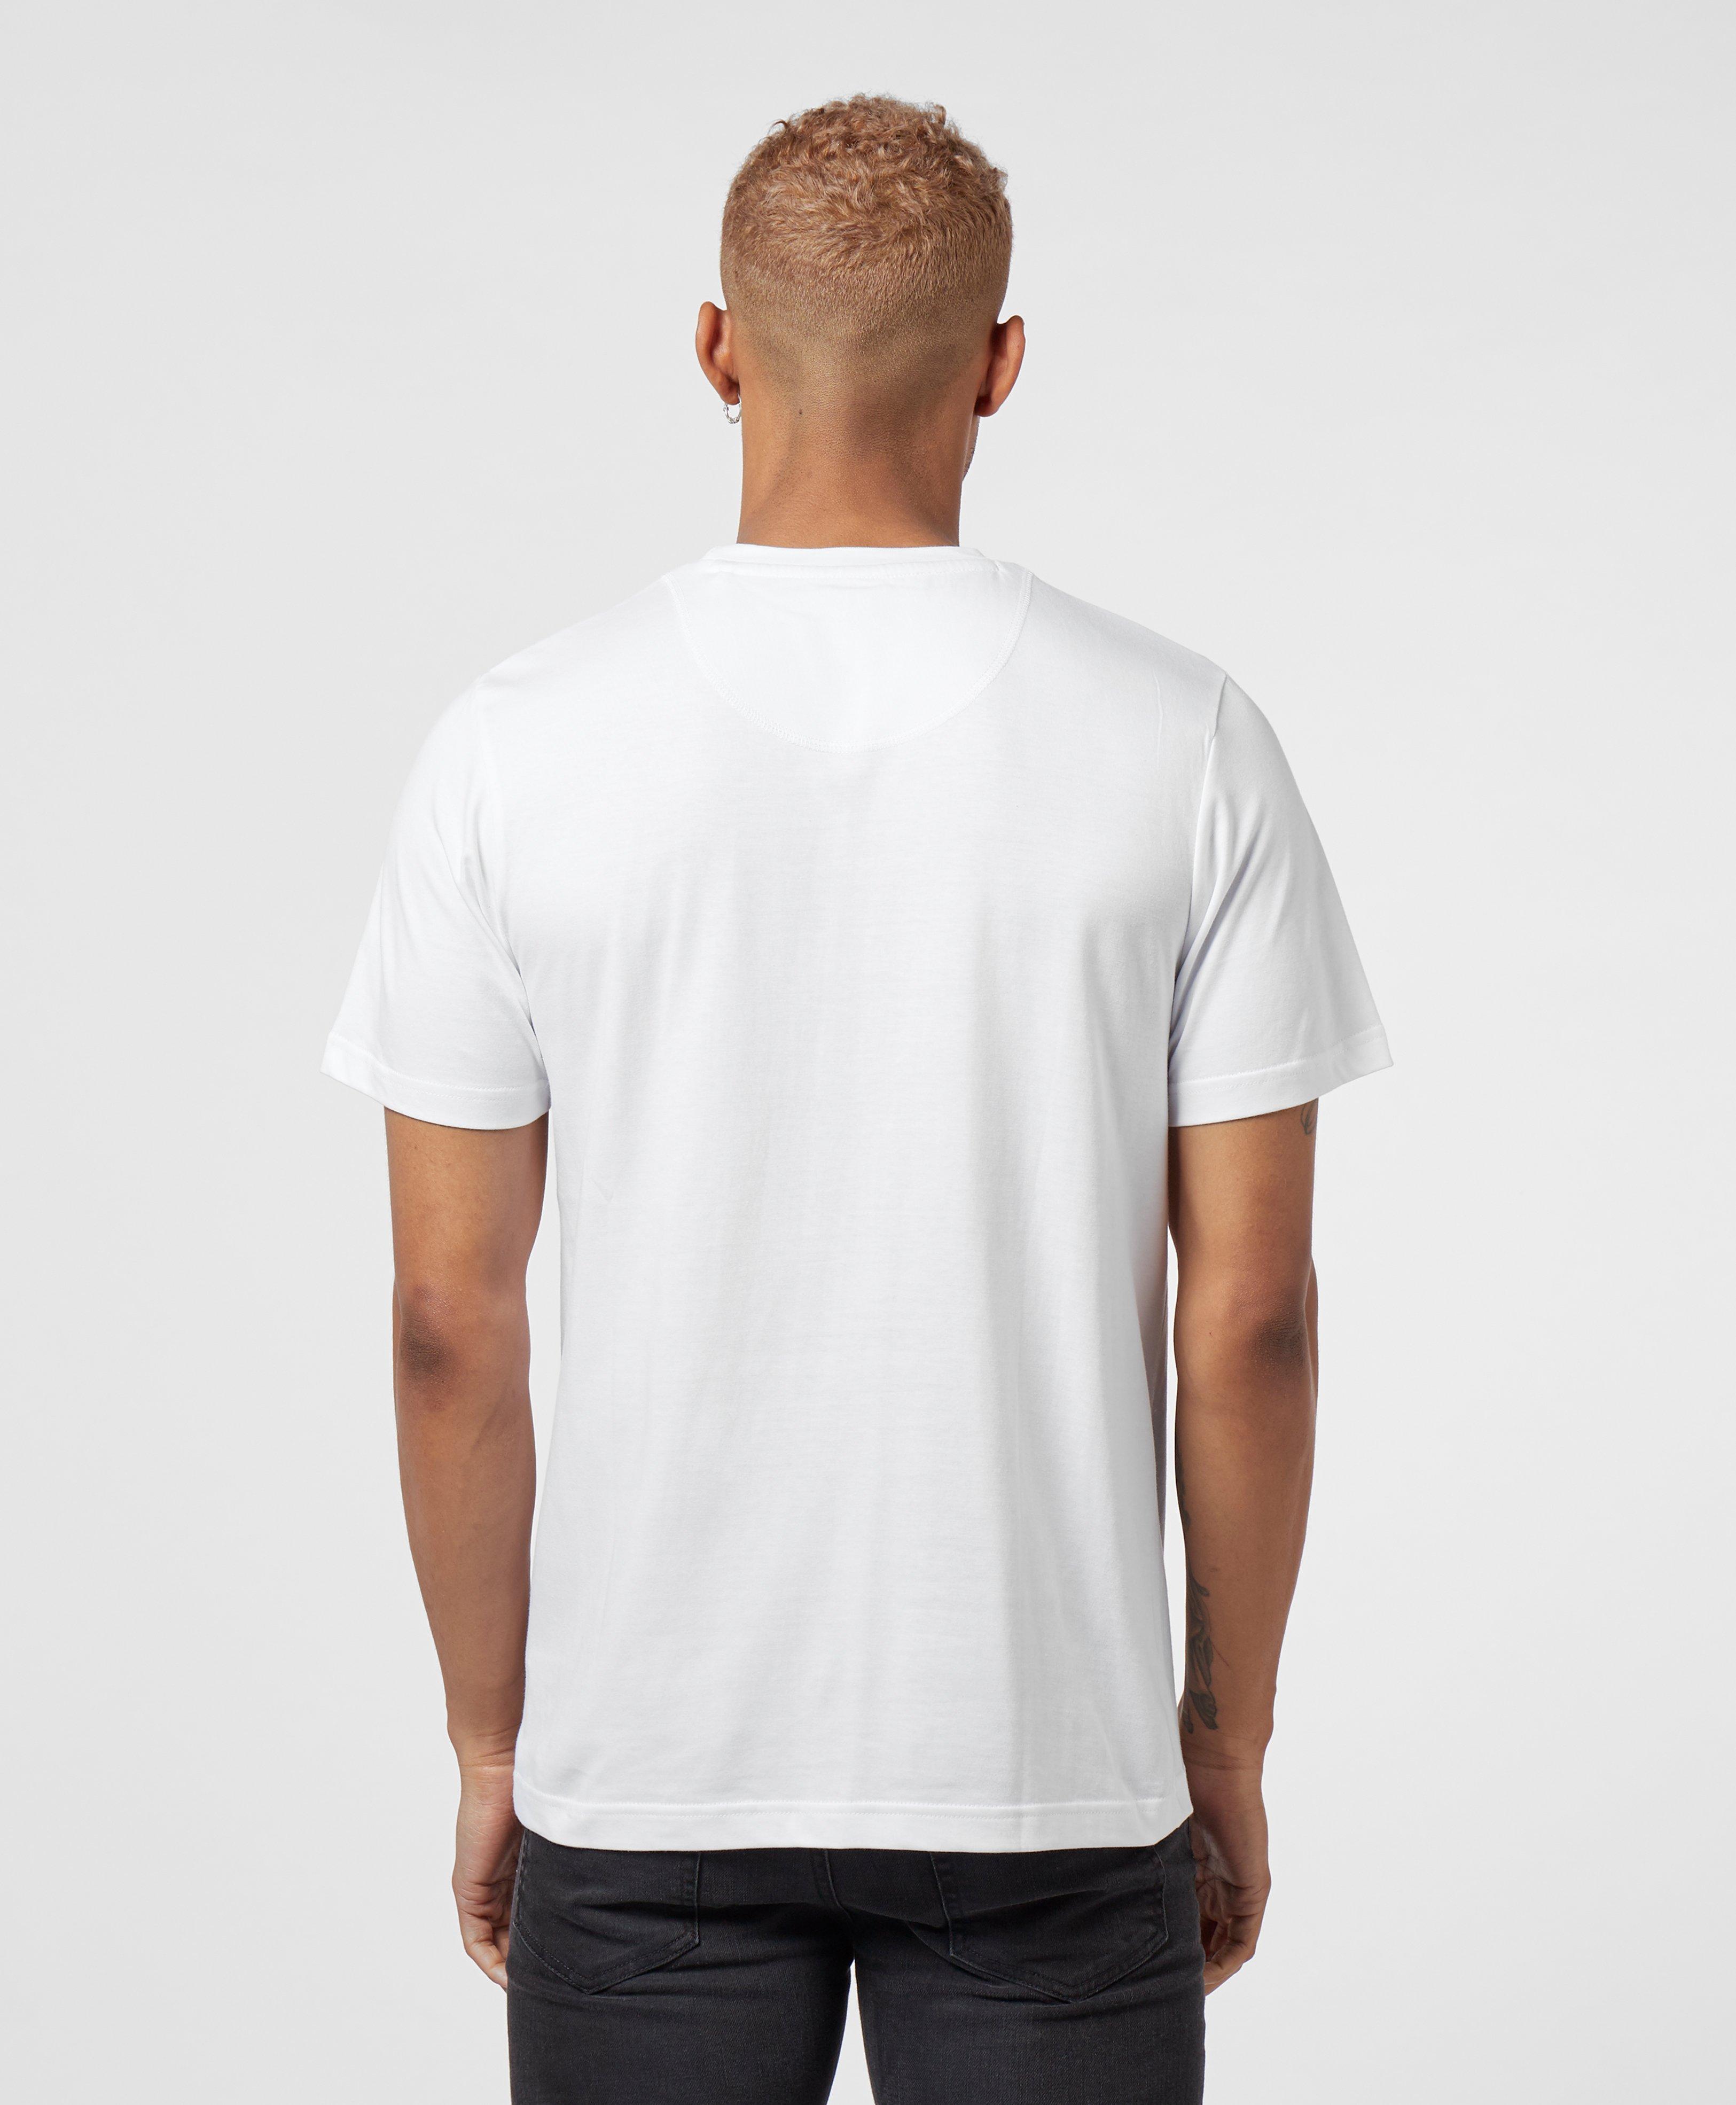 Berghaus Cotton Small Front Logo T-shirt in White for Men - Lyst